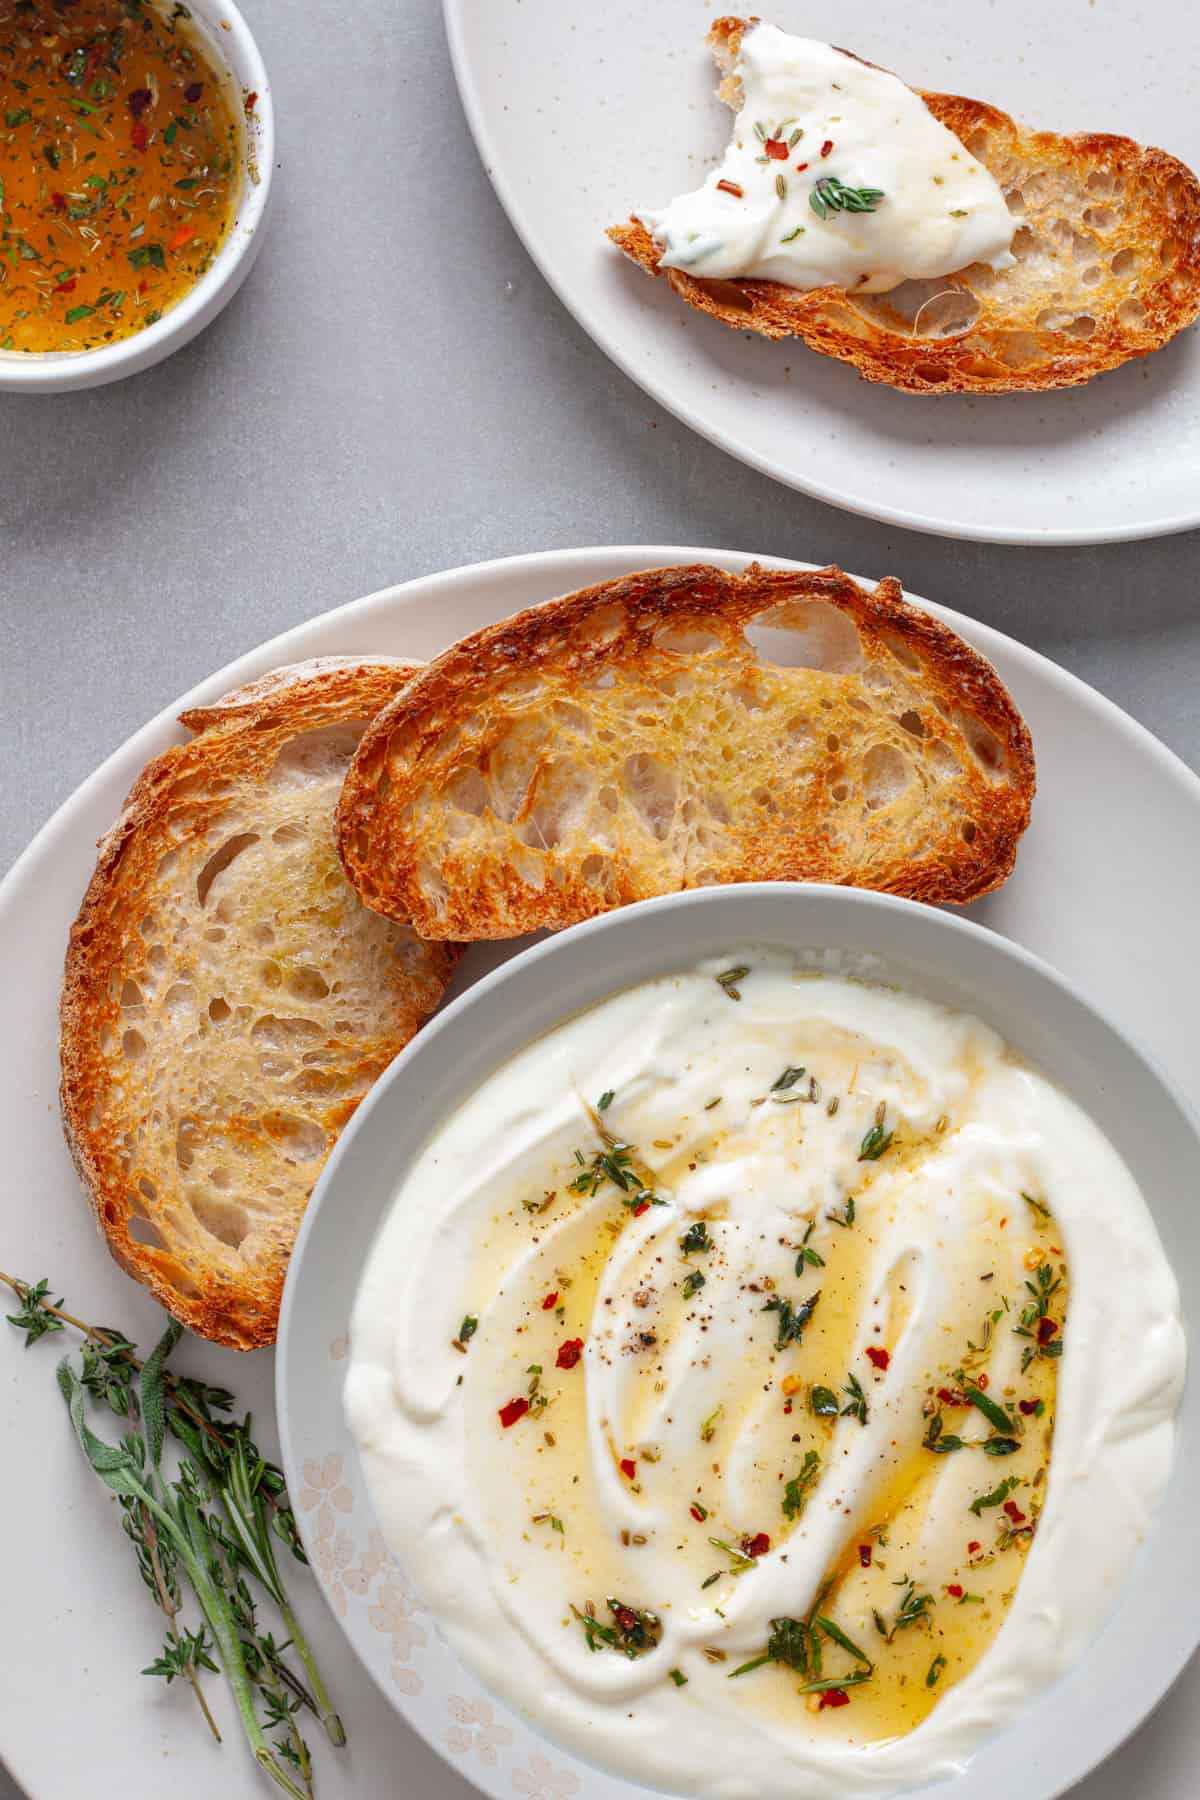 A platted of toasted bread with whipped ricotta dip topped with honey and herbs and a serving to the side.